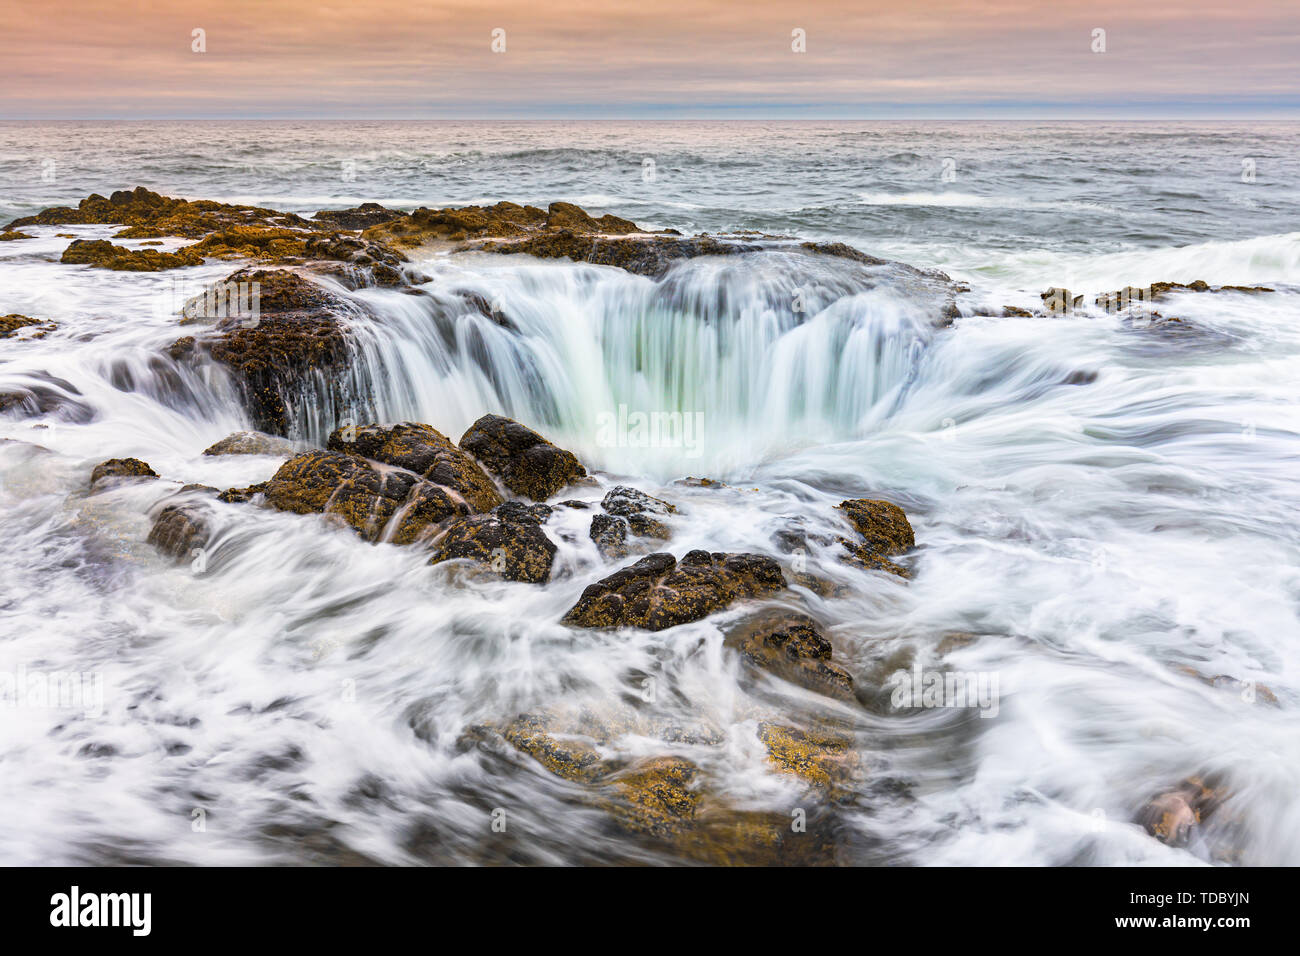 Thor's Well is a part of Cape Perpetua (a forested headland  that extends out into the Pacific Ocean) a part of Oregon's coast. Stock Photo